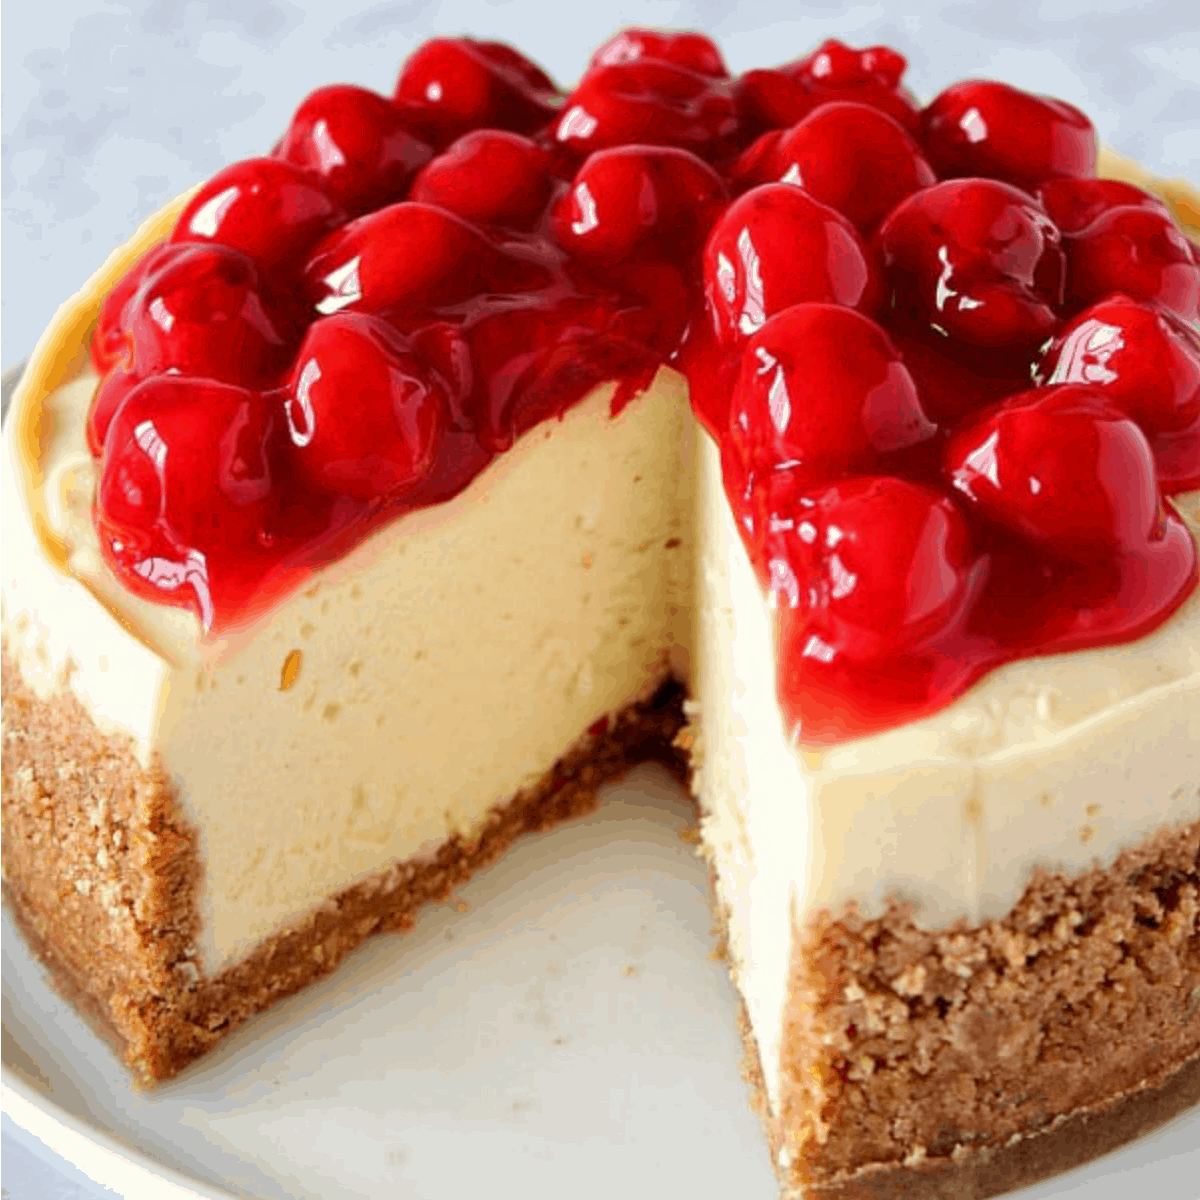 https://www.crunchycreamysweet.com/wp-content/uploads/2019/10/Instant-Pot-cheesecake-feat.png